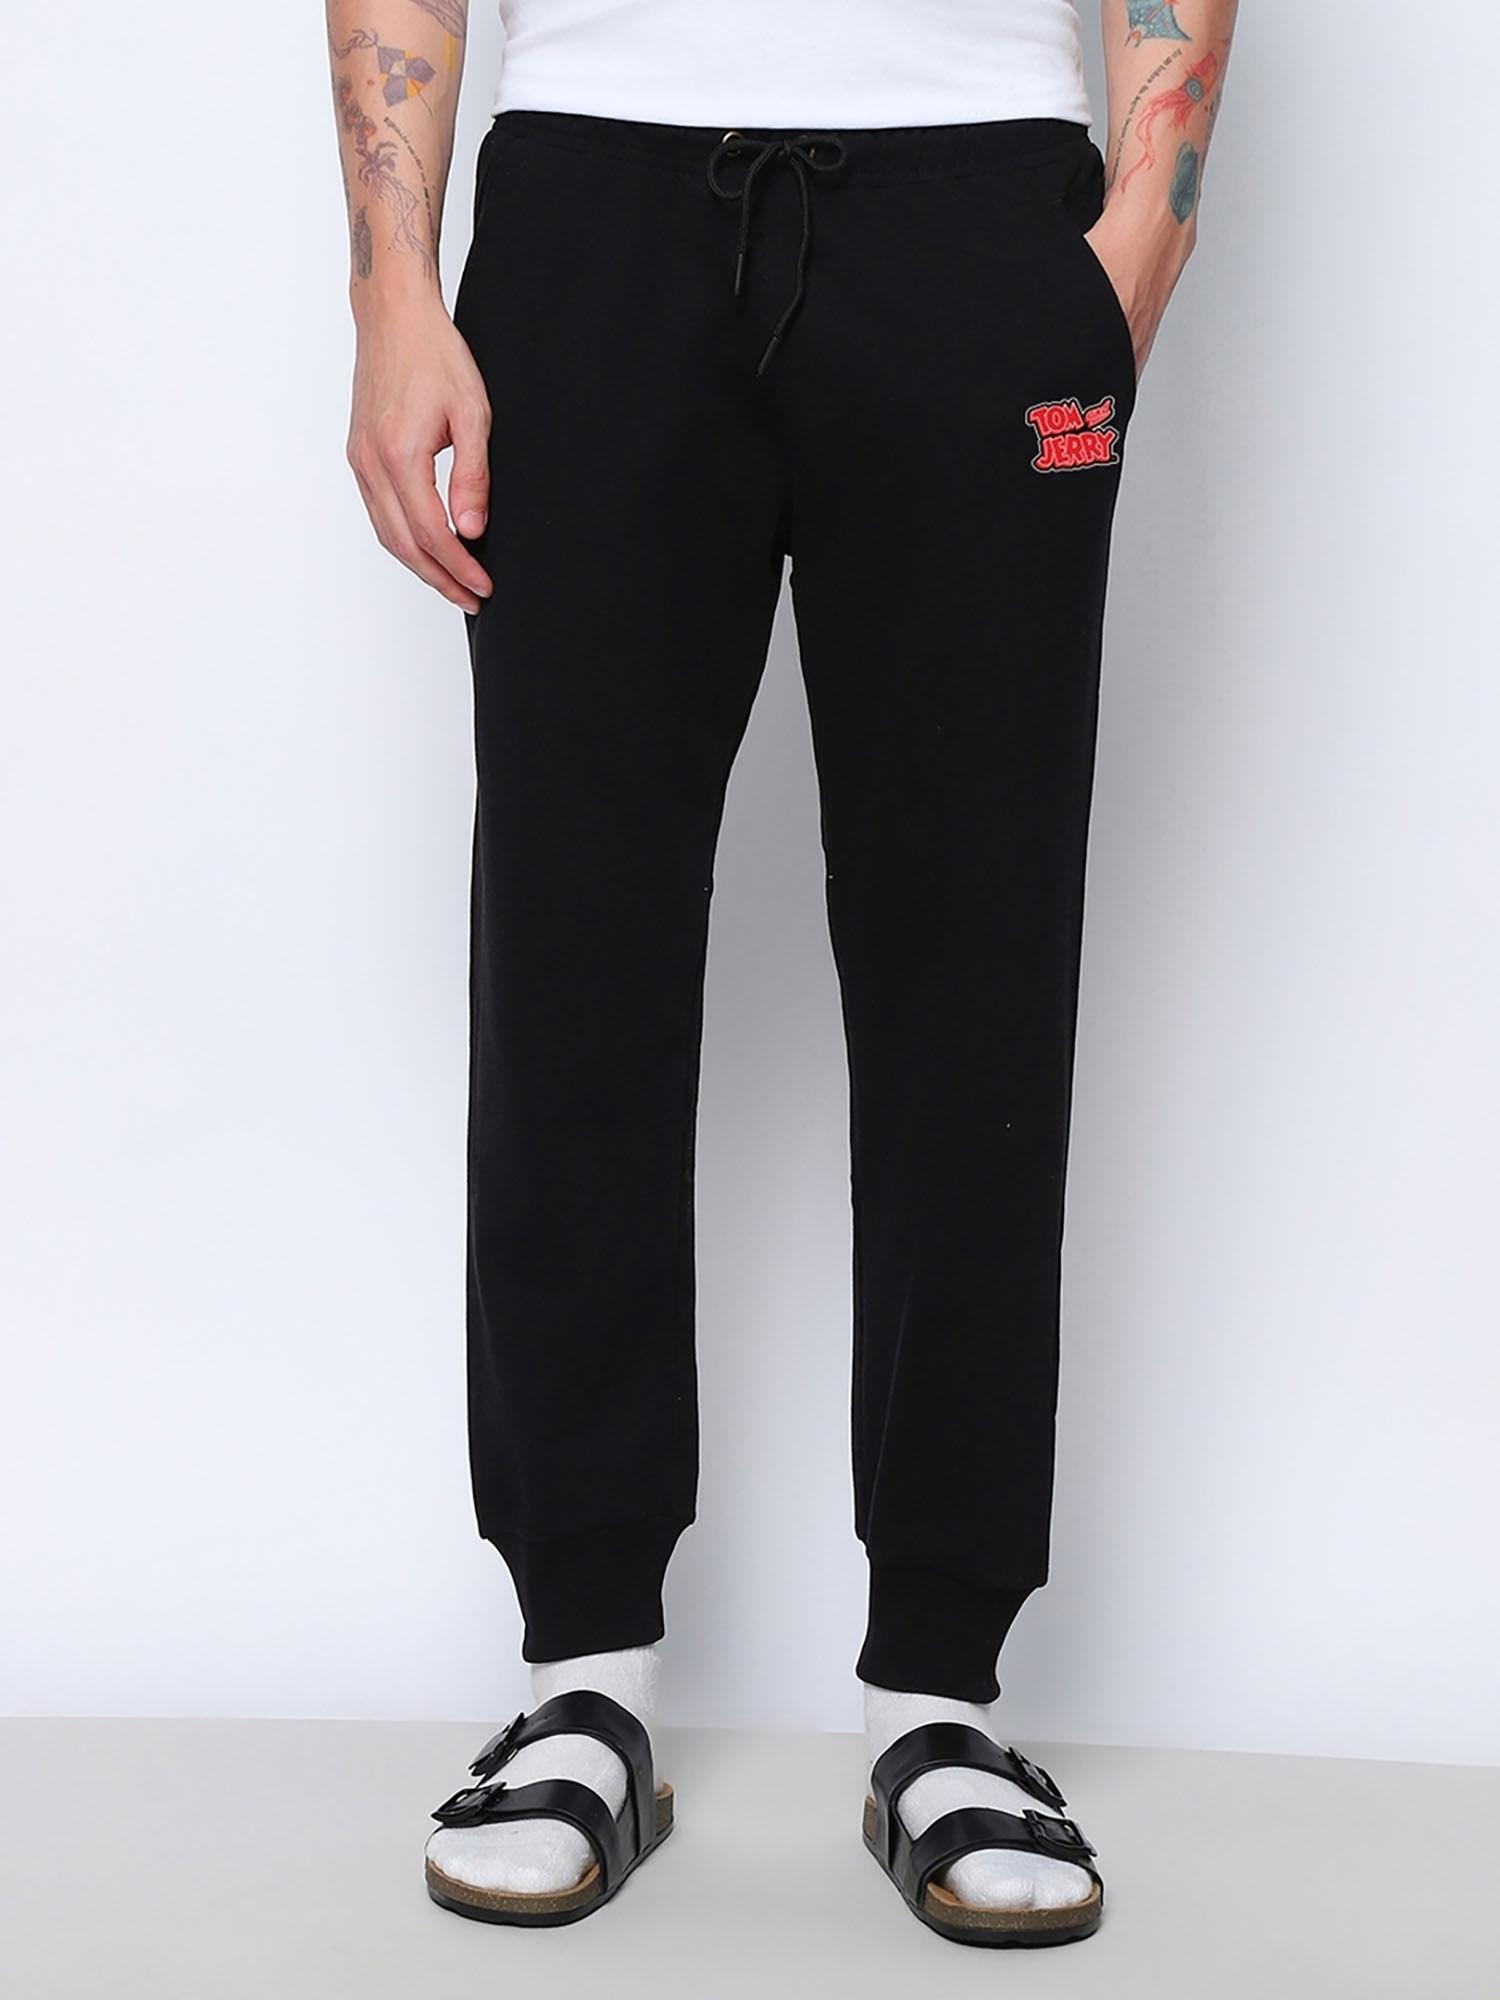 x official tom & jerry merchandise men black printed oversized joggers